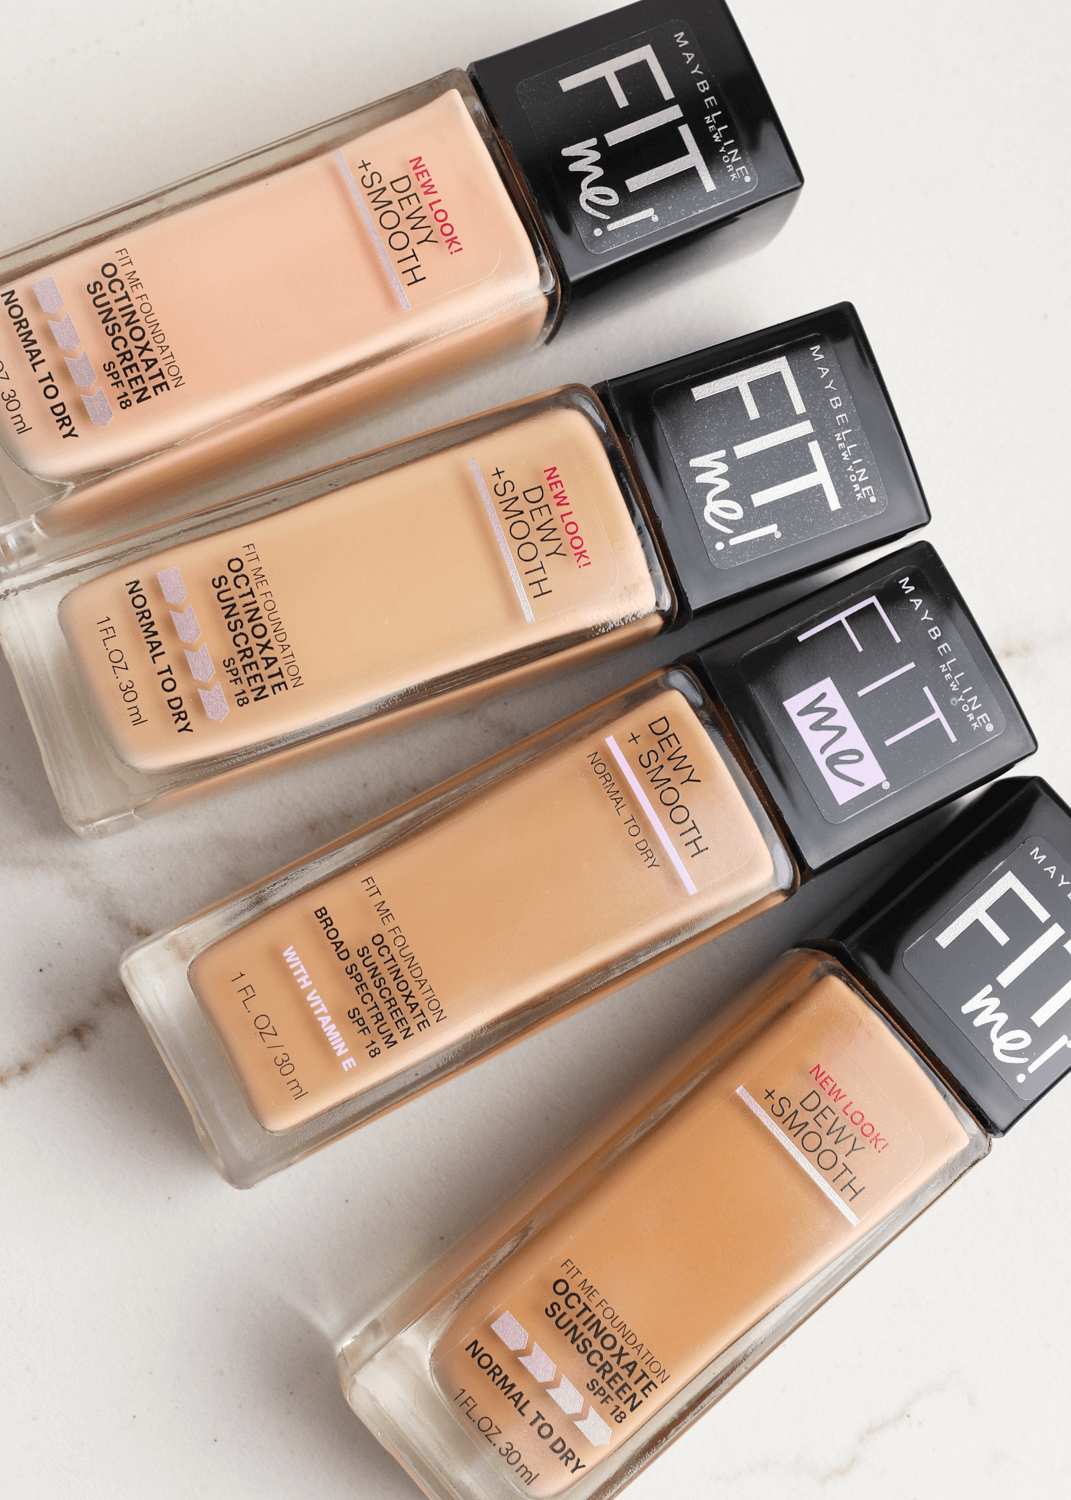 Base de maquillaje Fit Me Dewy & Smooth 30ml